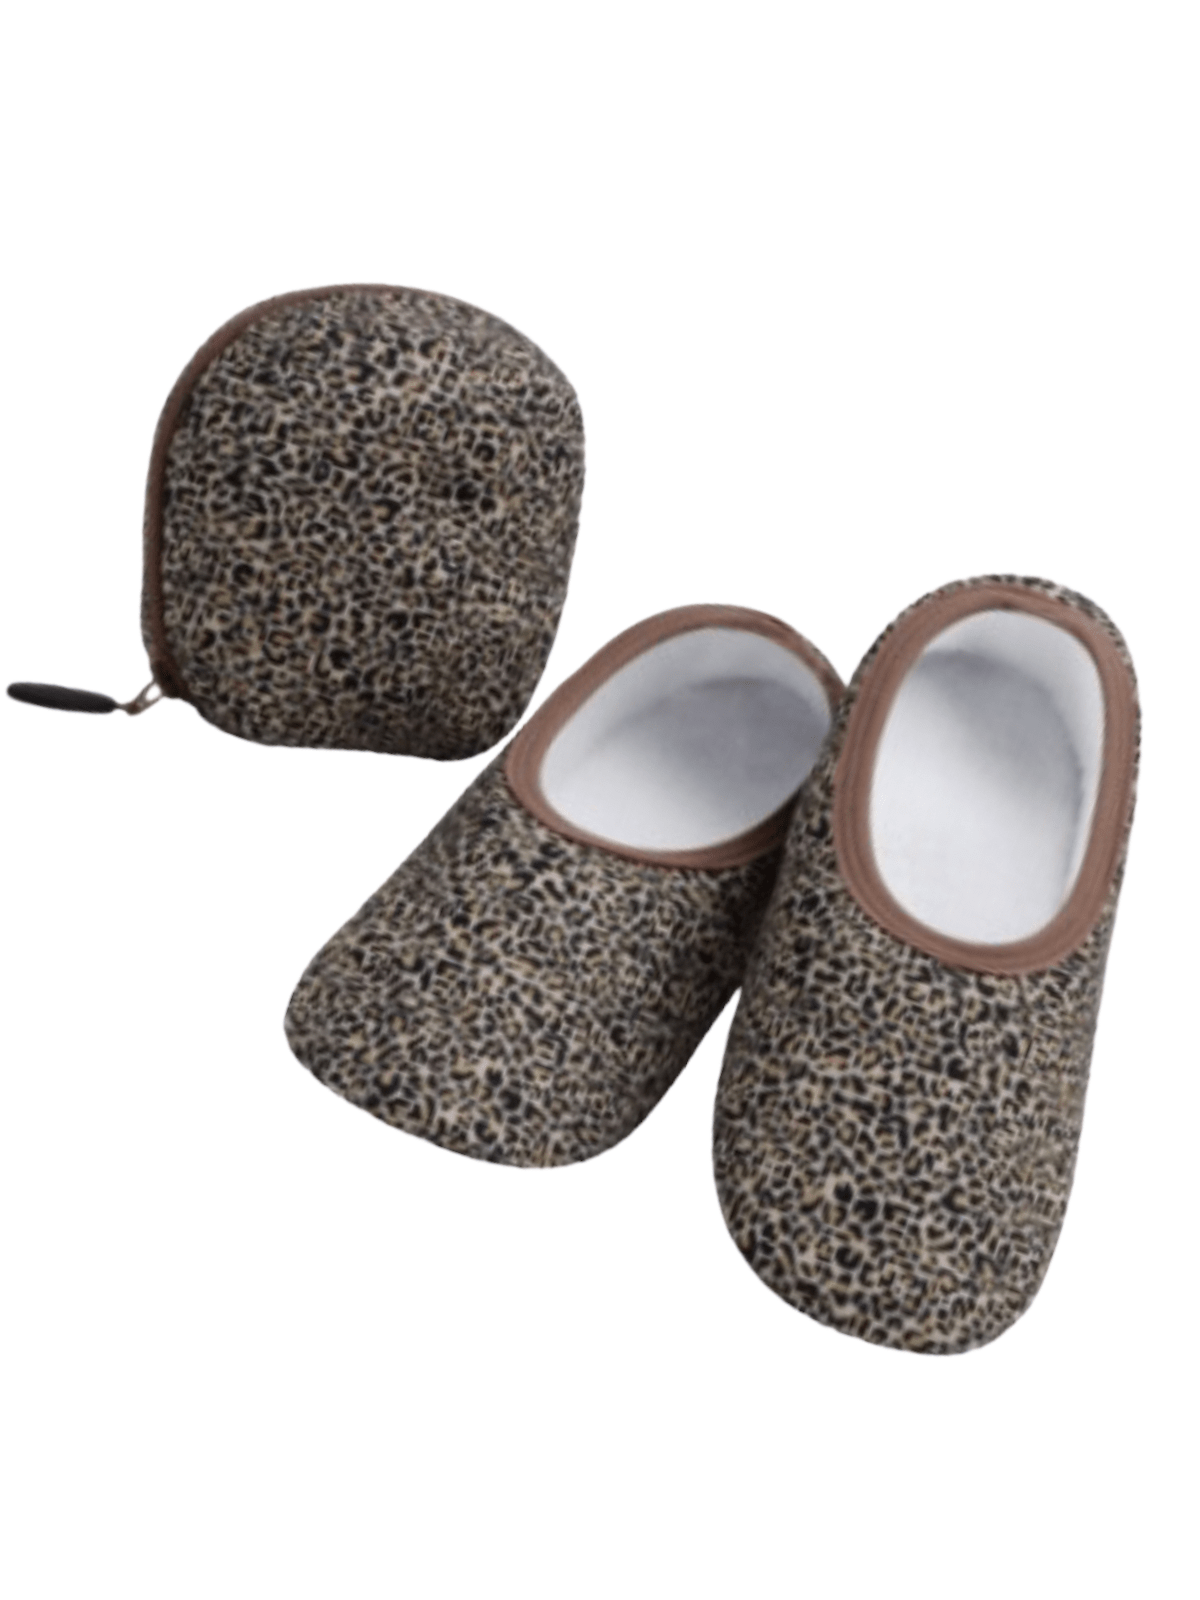 Snoozies Skinnies Travel Pouch Snoozies Slippers